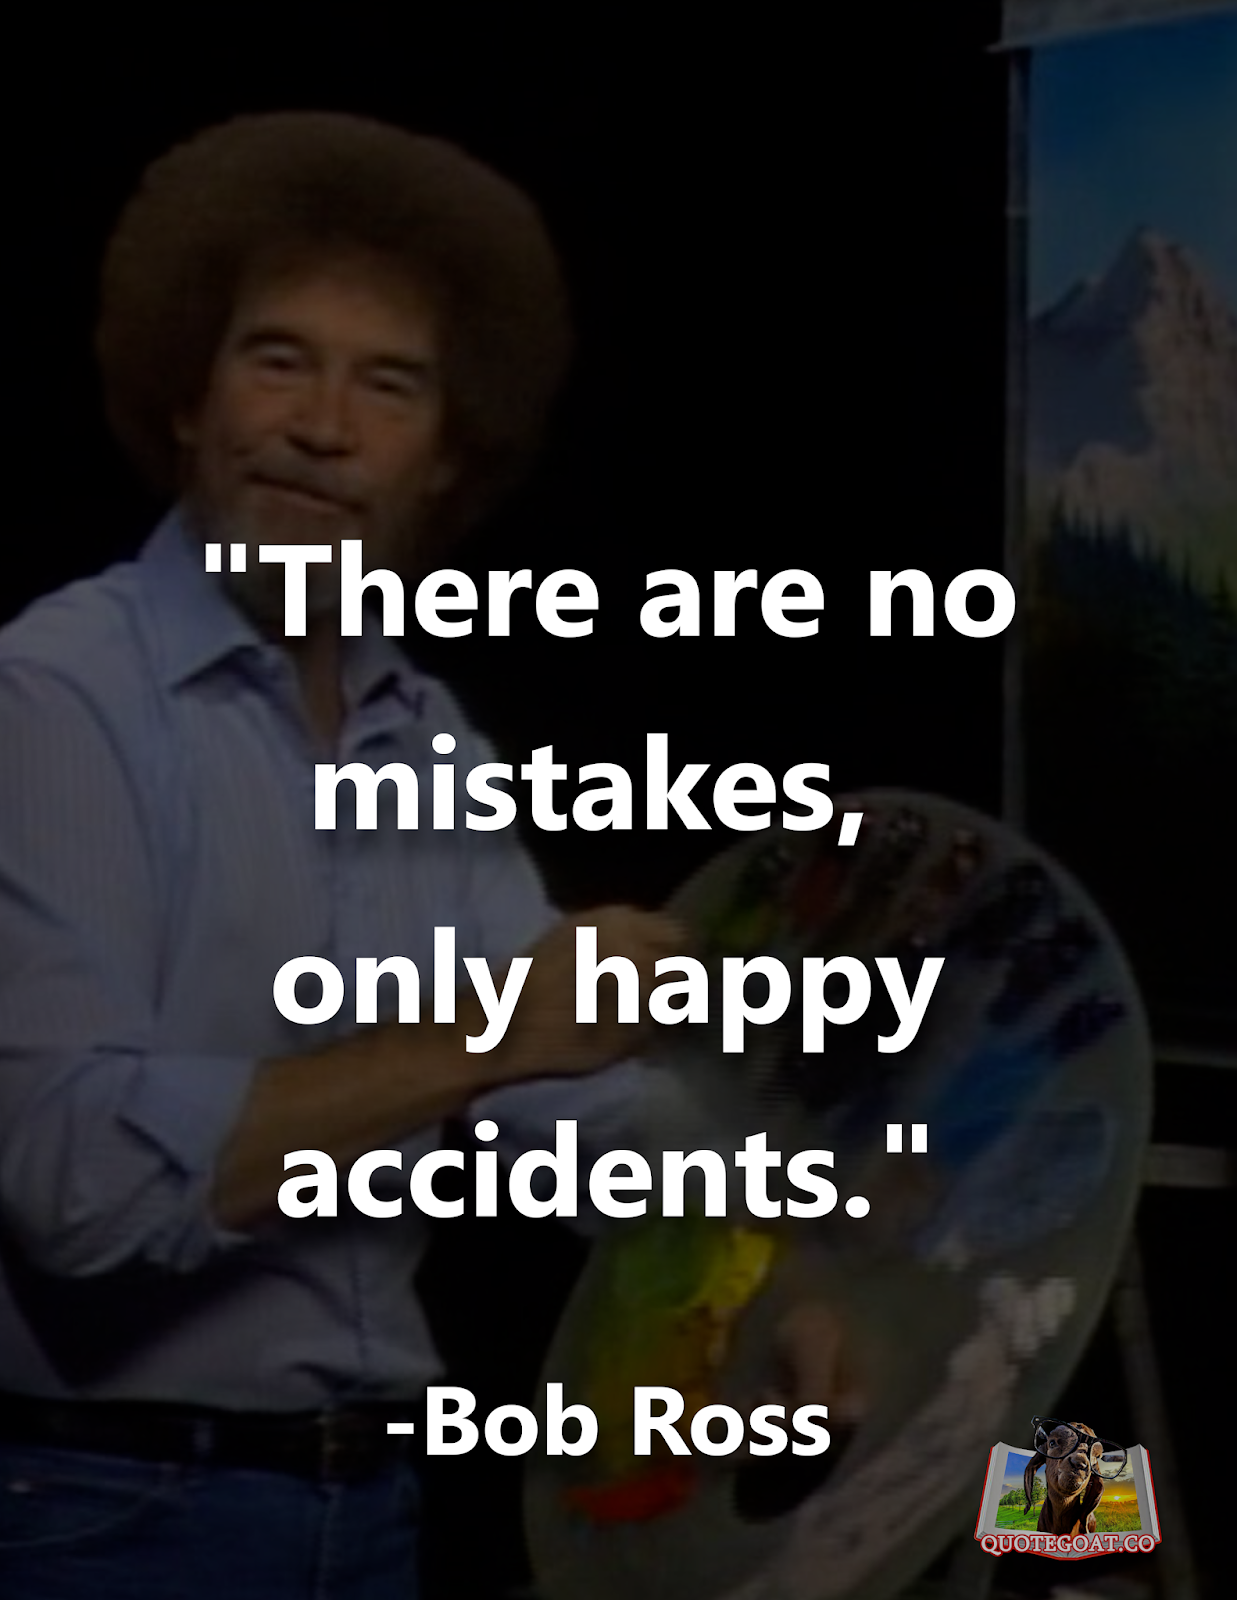 Quote Goat Daily Quotes Bob Ross Happy Accidents